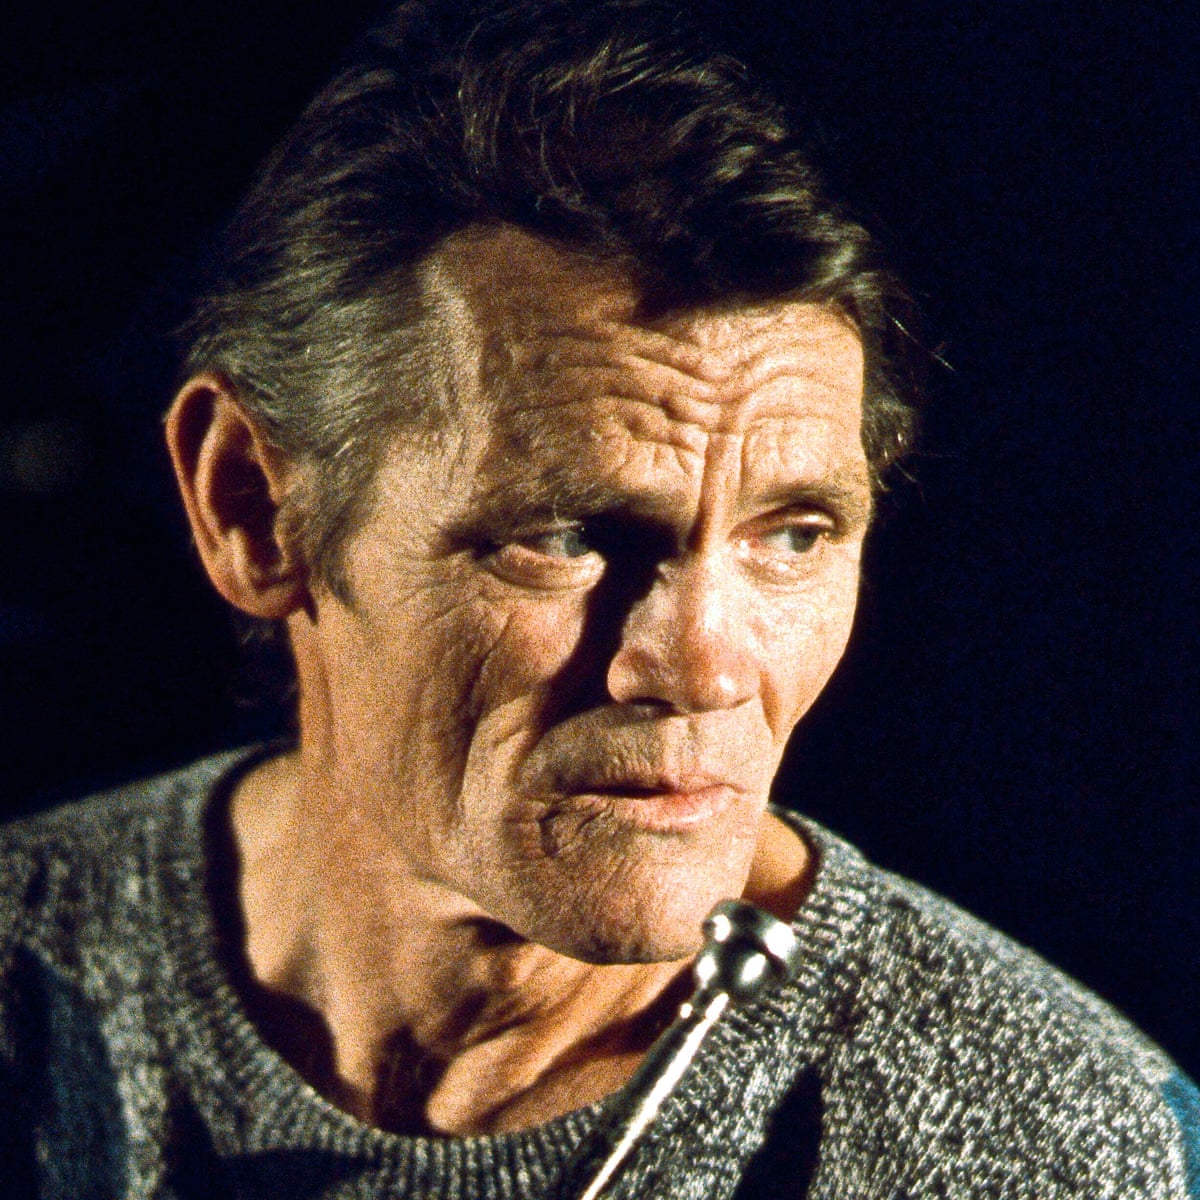 THEY'RE ALL ALCOHOLICS.Alcoholism causes LATENT damage.It doesn't show up until years later.Even if you finally stop drinking, the physical deterioration continues.Chet Baker.